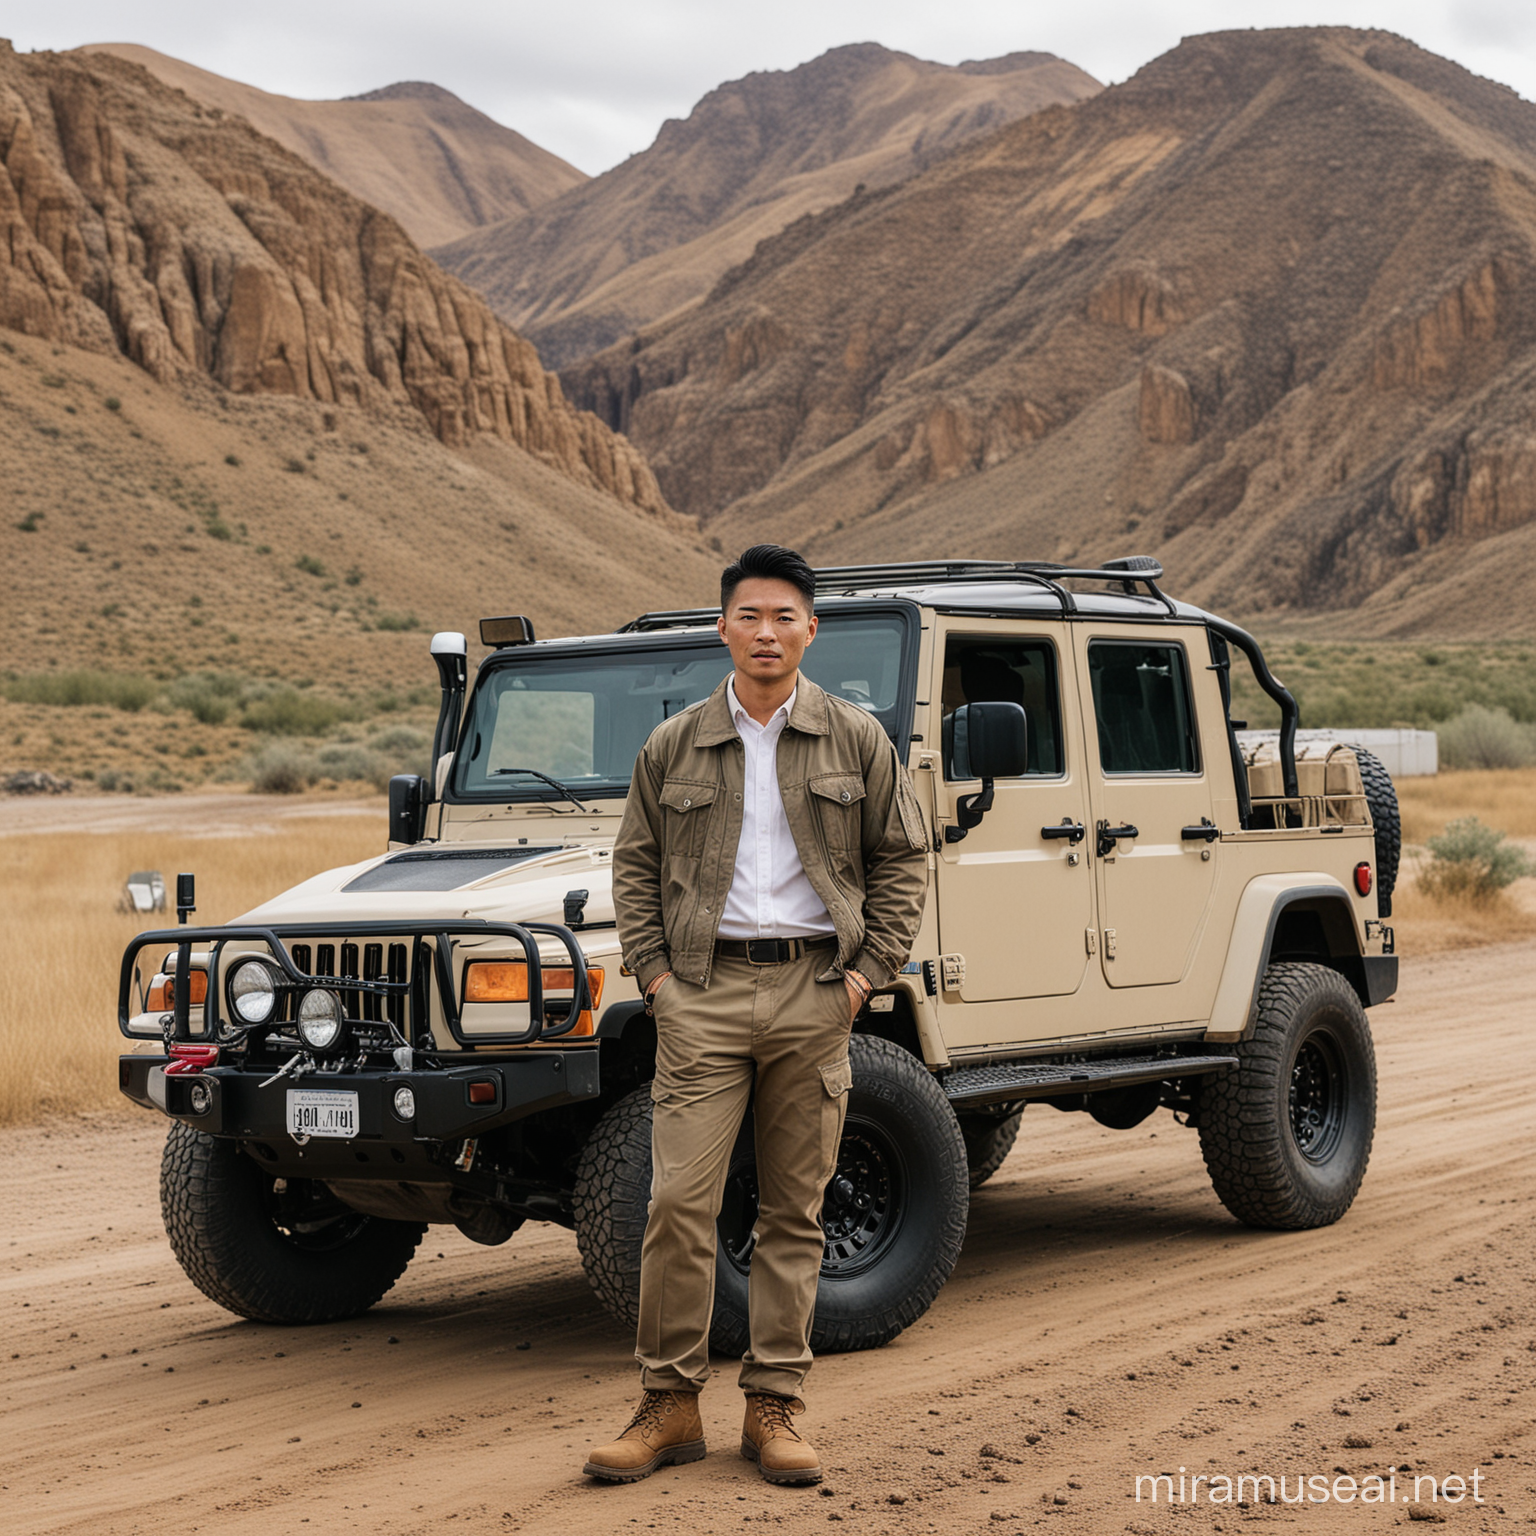 portrait of an asian man, clothing jacket, trousers, men's shoes, standing in front of a jeep parked on the side of a dirt road, humvee, steel body, rolling foothills, adventure gear, vehicle design trends, rocky terrain, high mountains, with rack rooftop, pacific northwest, travel and adventure